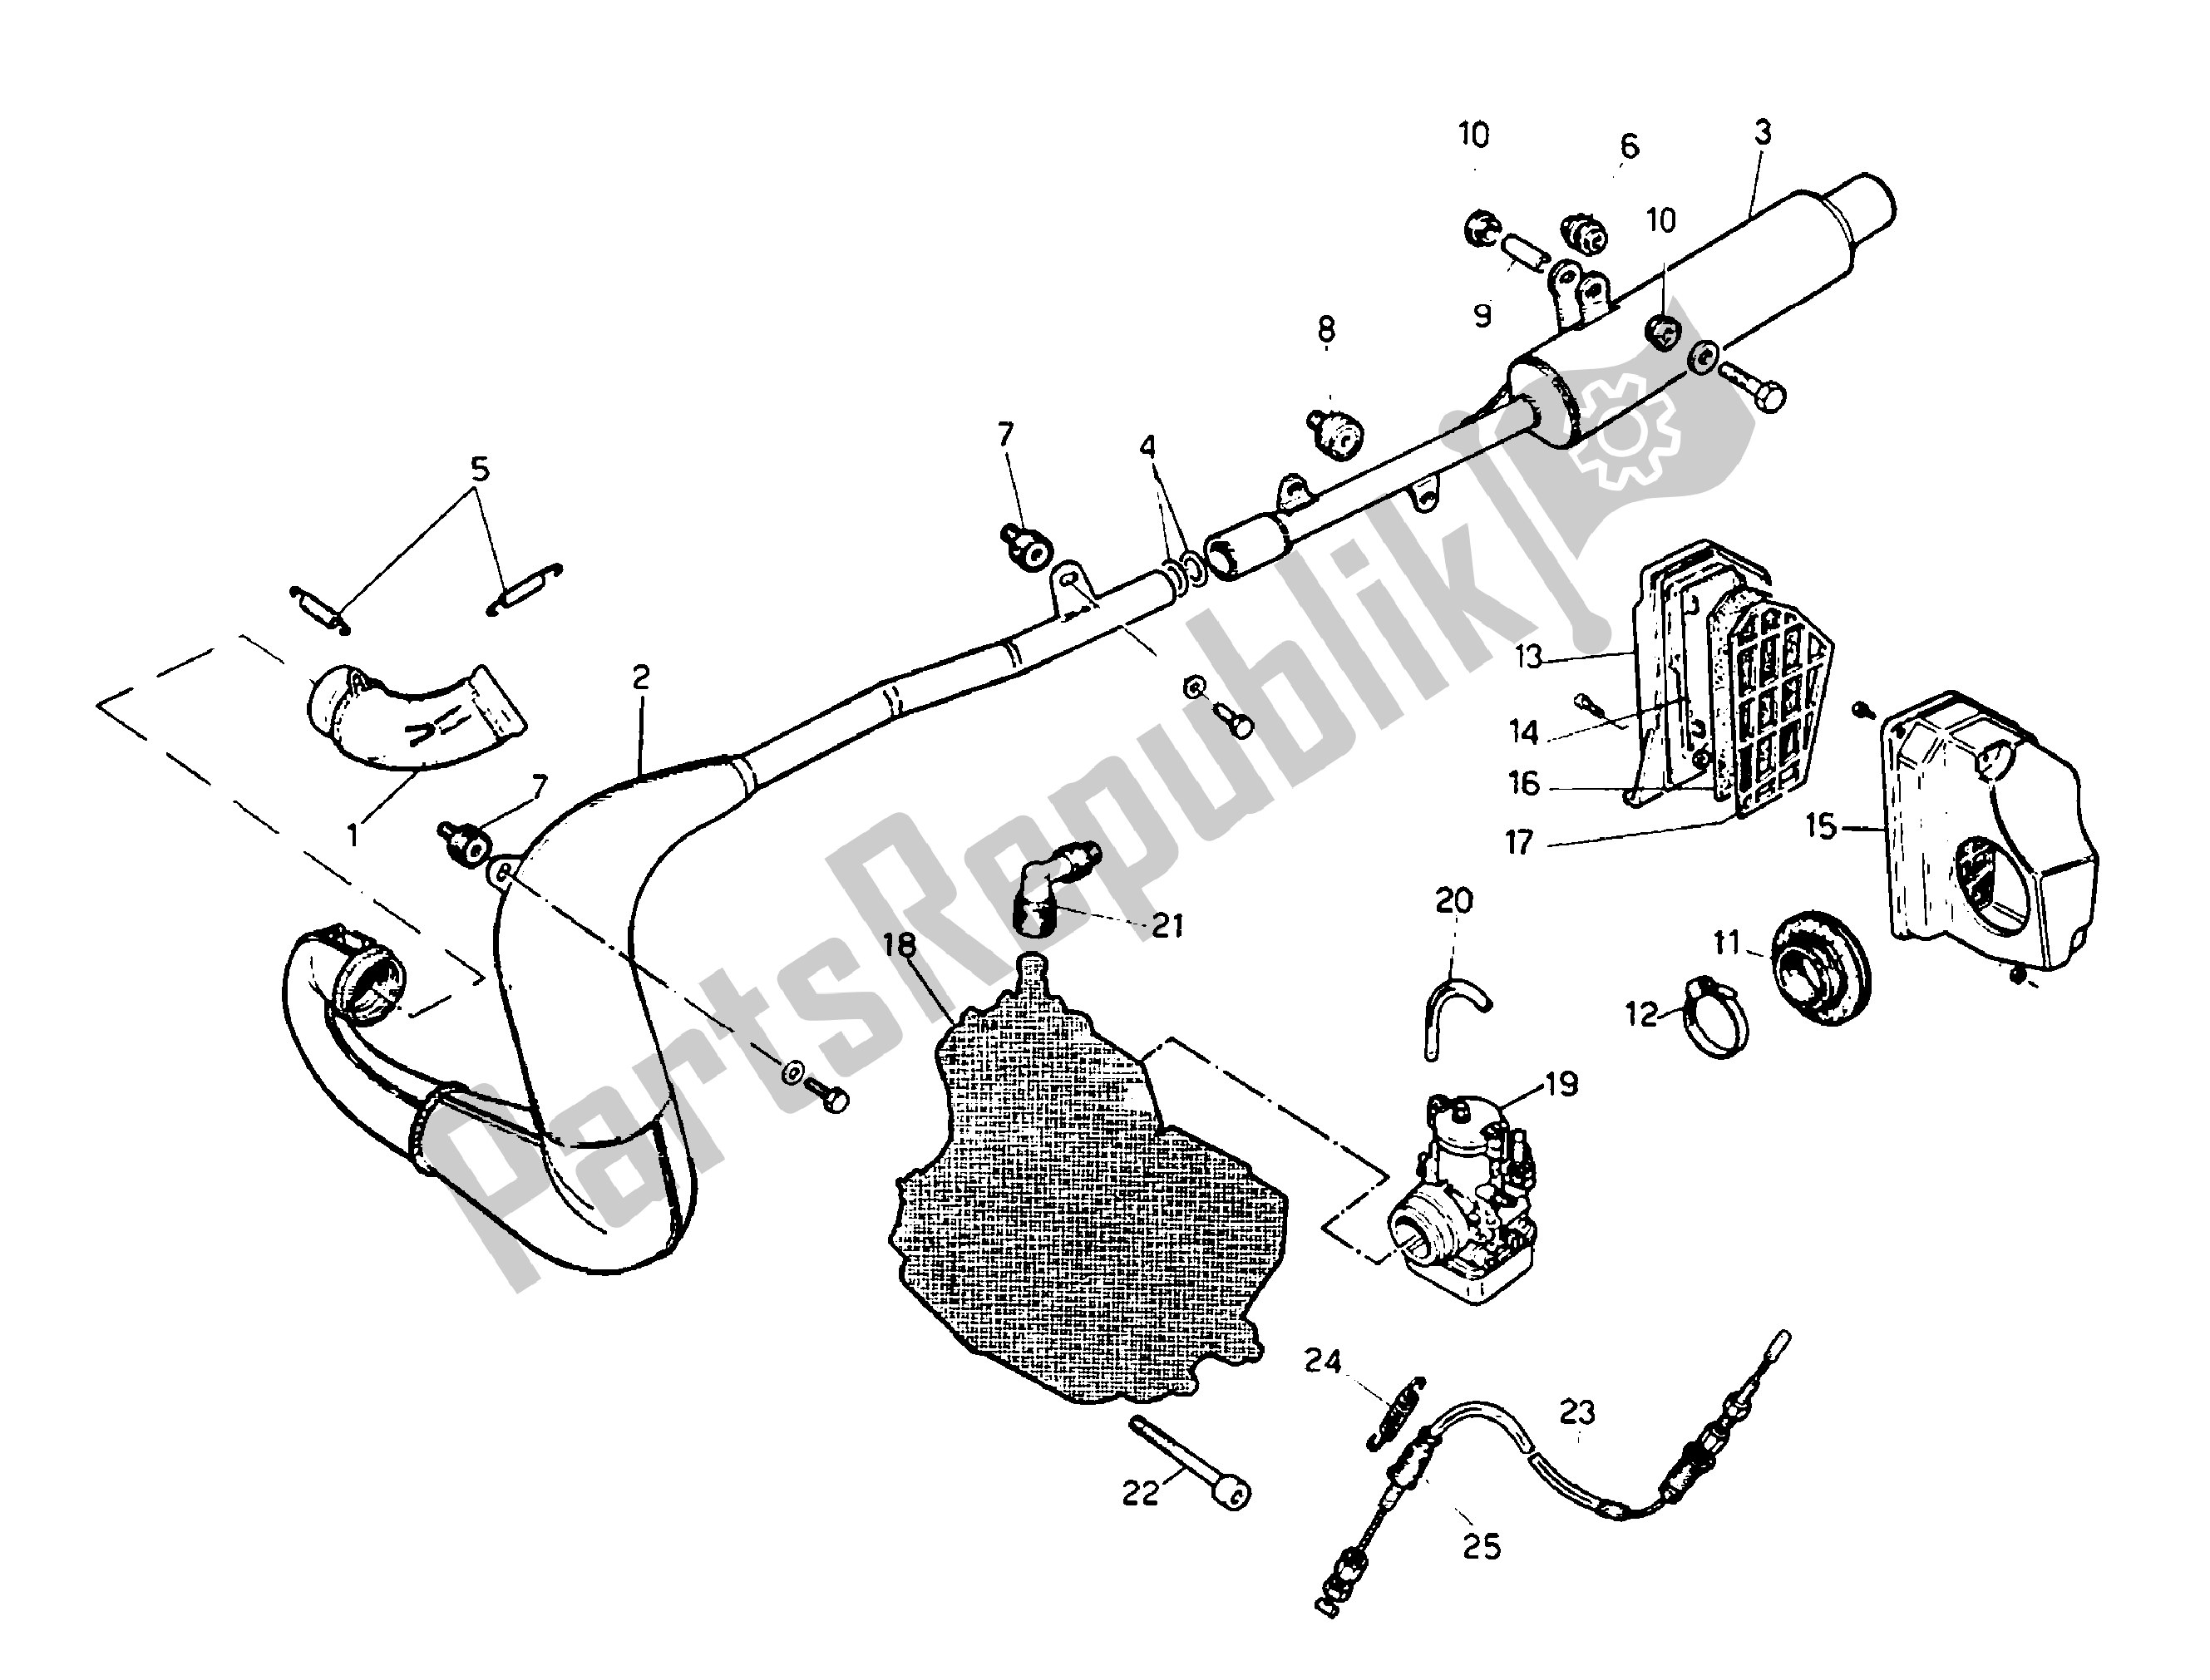 All parts for the Exhaust Assembly of the Aprilia Tuareg 125 1987